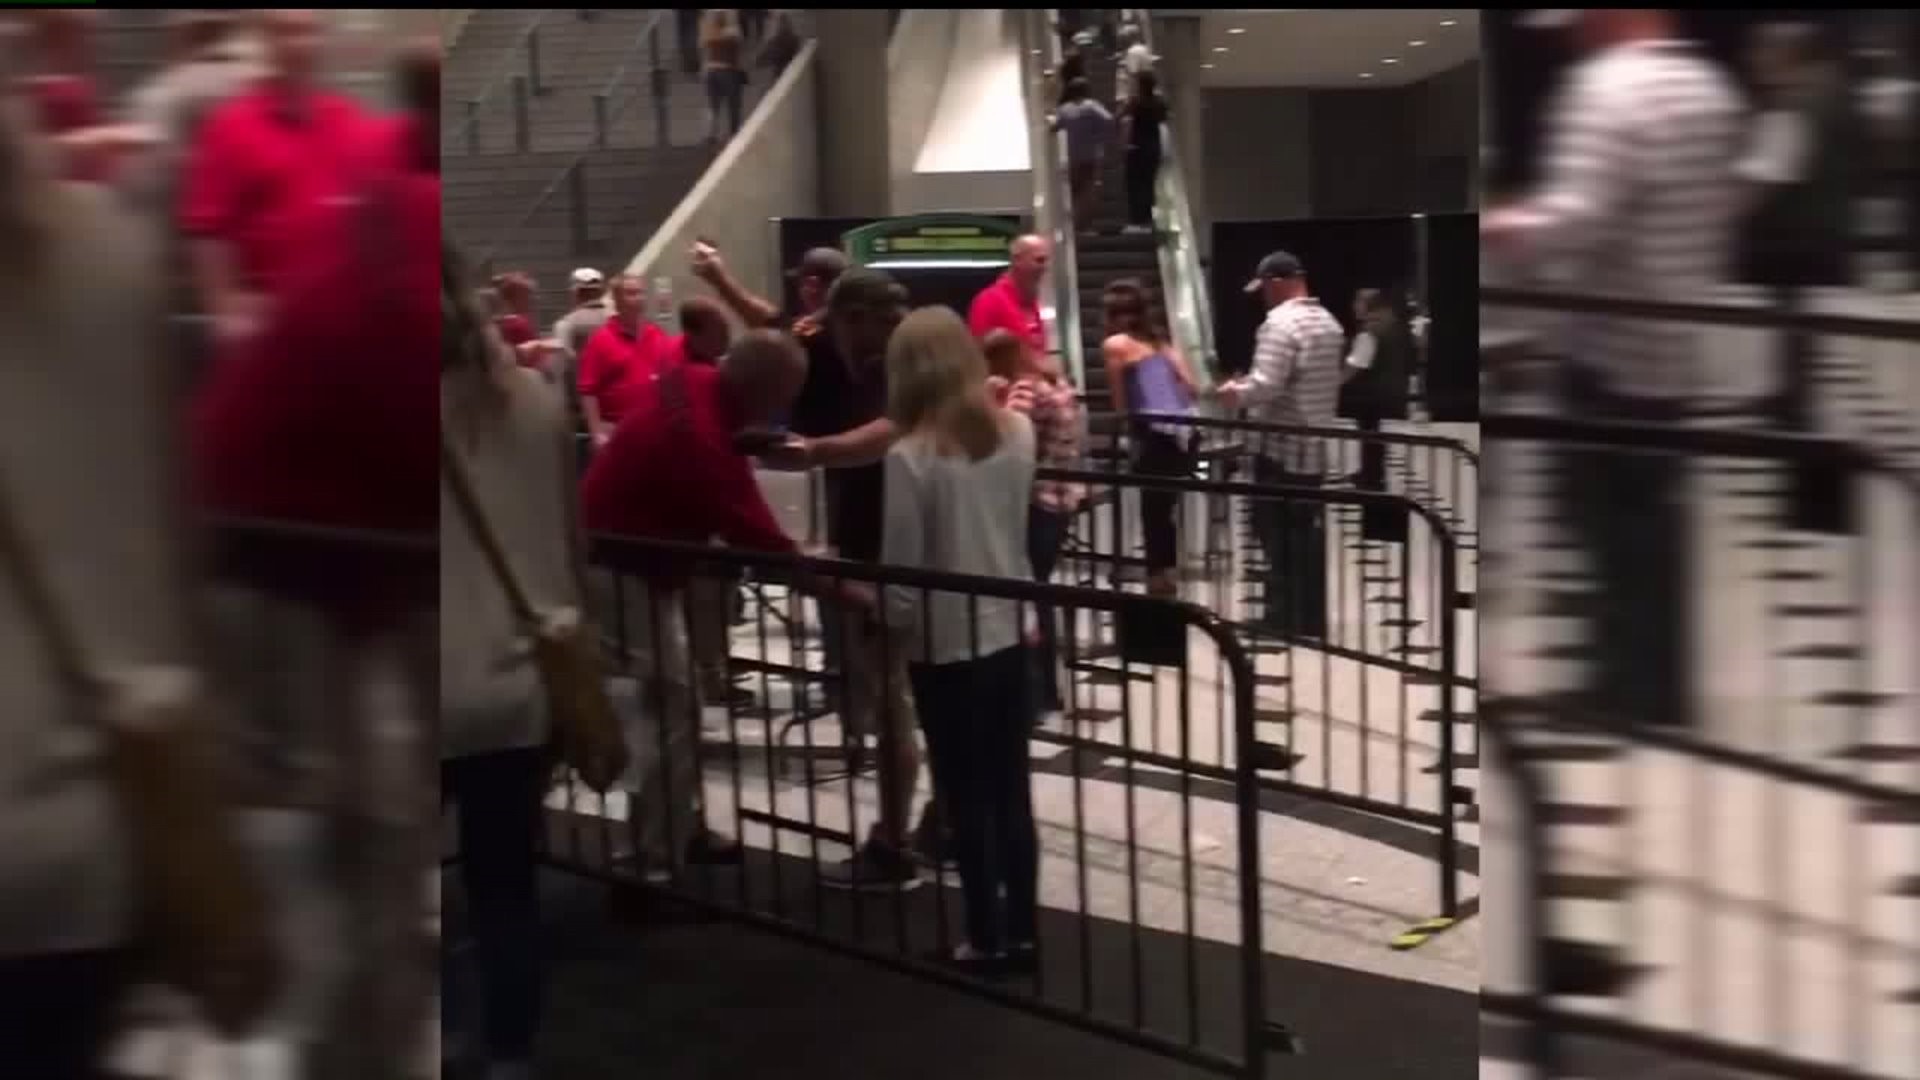 Heightened security at TaxSlayer Center